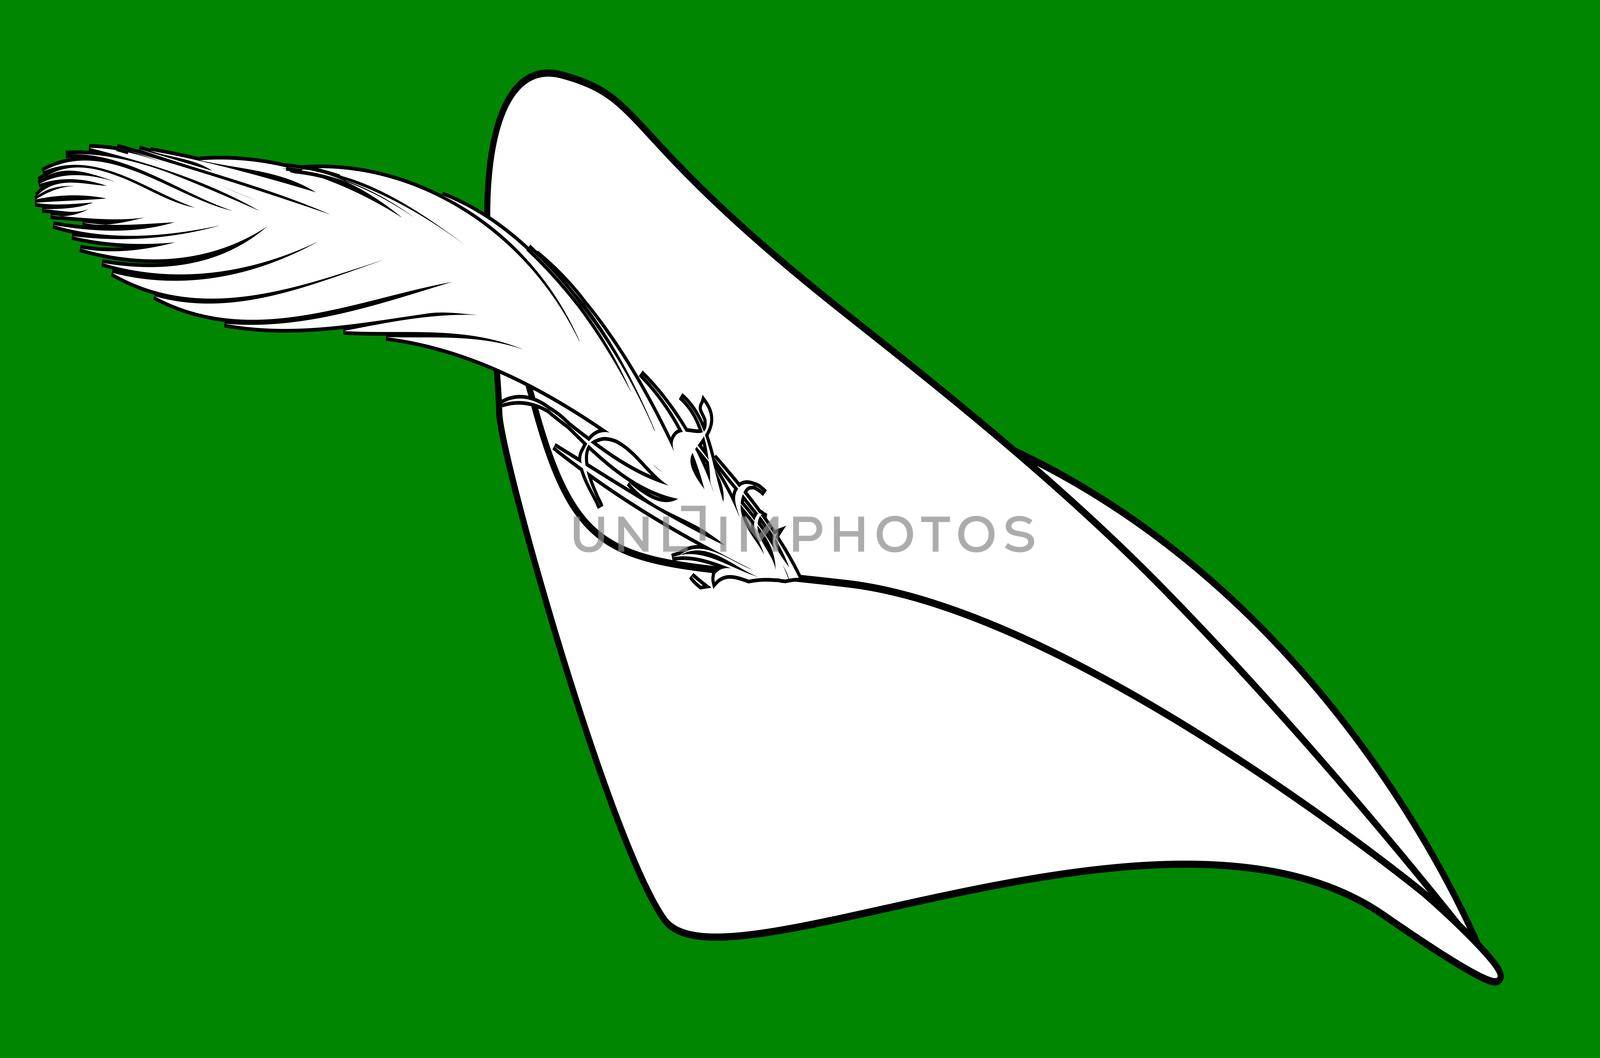 The type of cap worn by Robin Hood i black line drawing over a green background